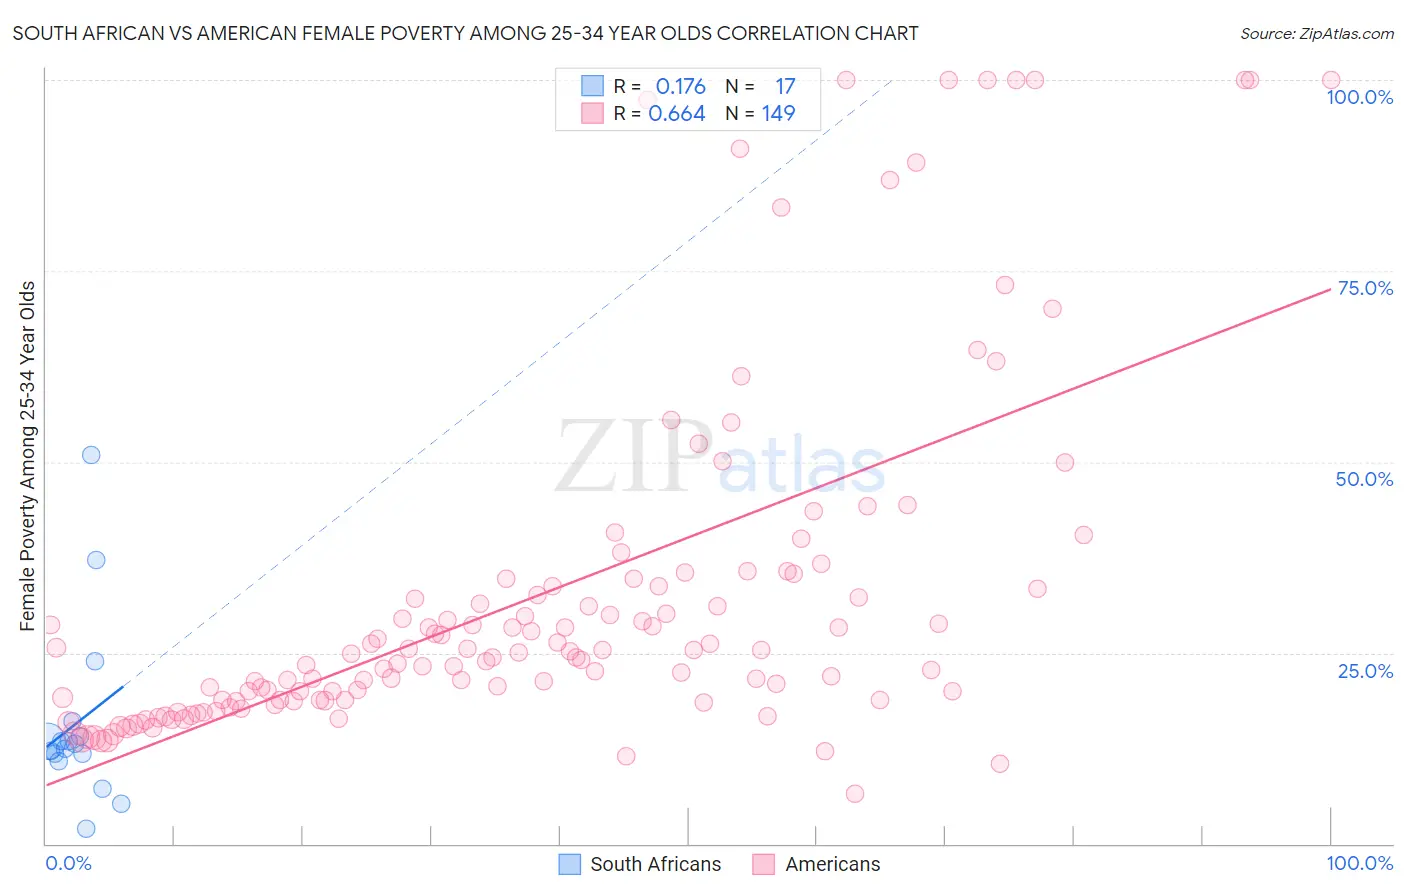 South African vs American Female Poverty Among 25-34 Year Olds